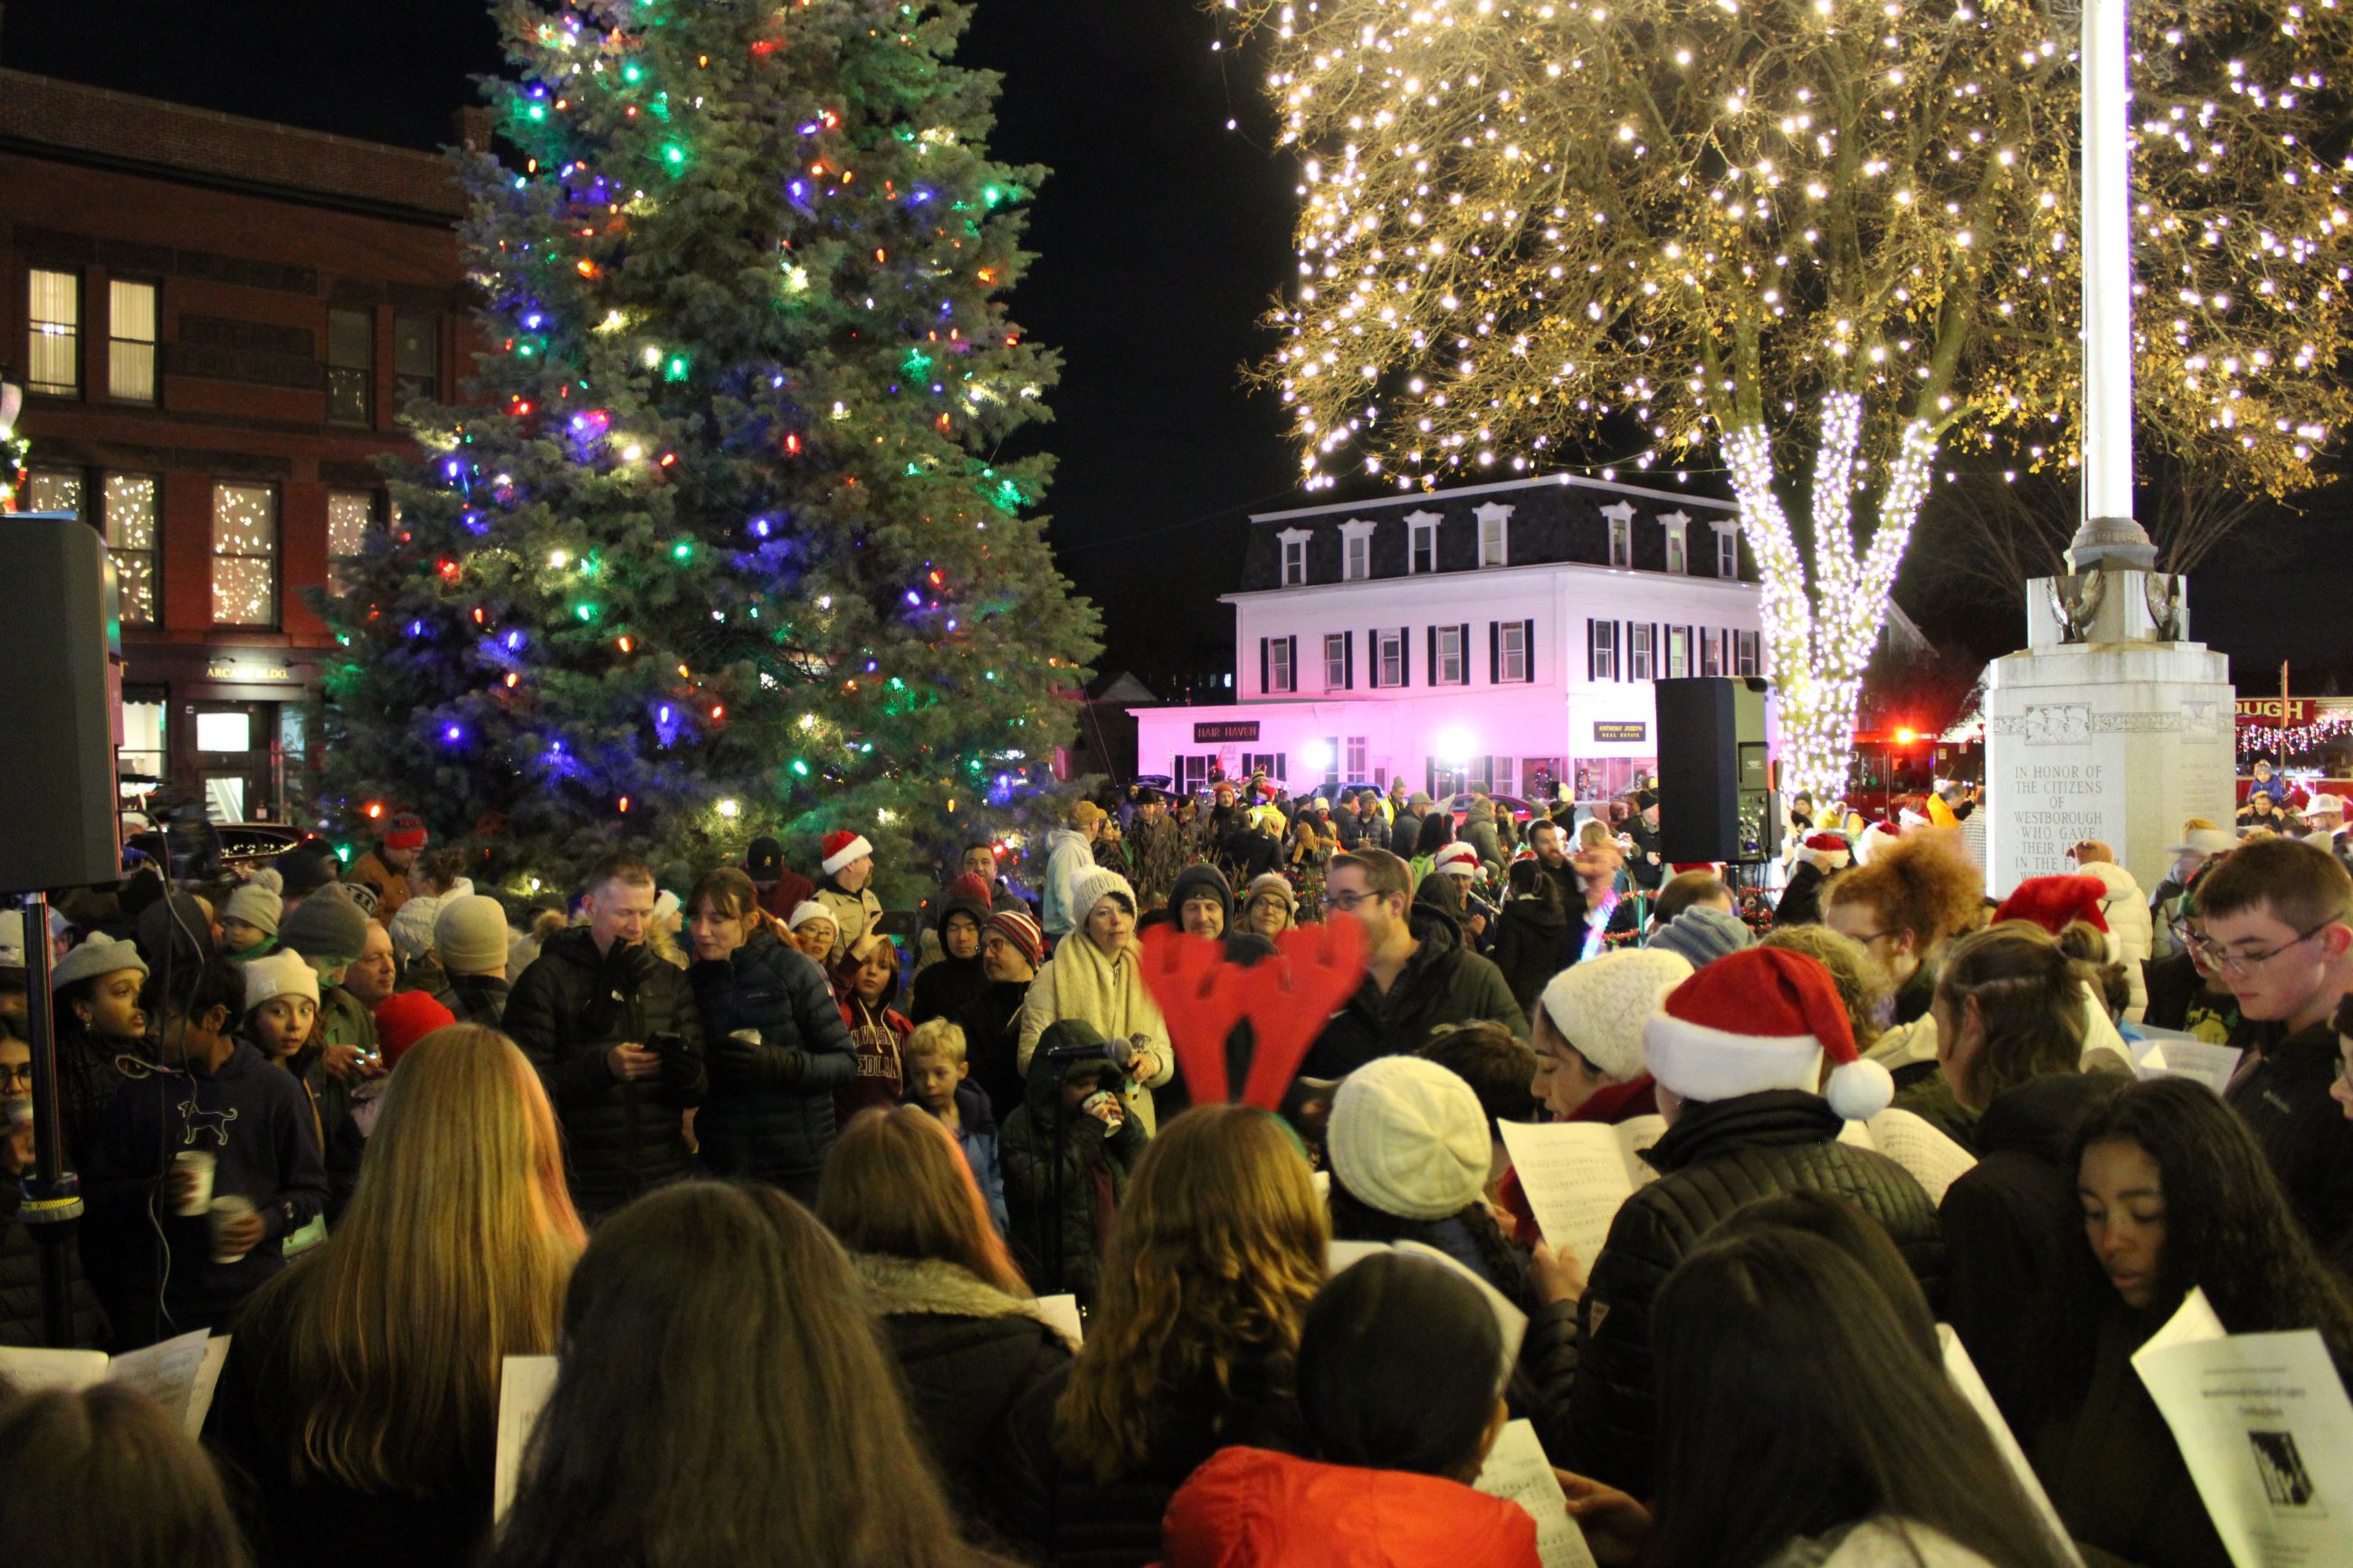 Westborough welcomes the holiday season with Winter Stroll